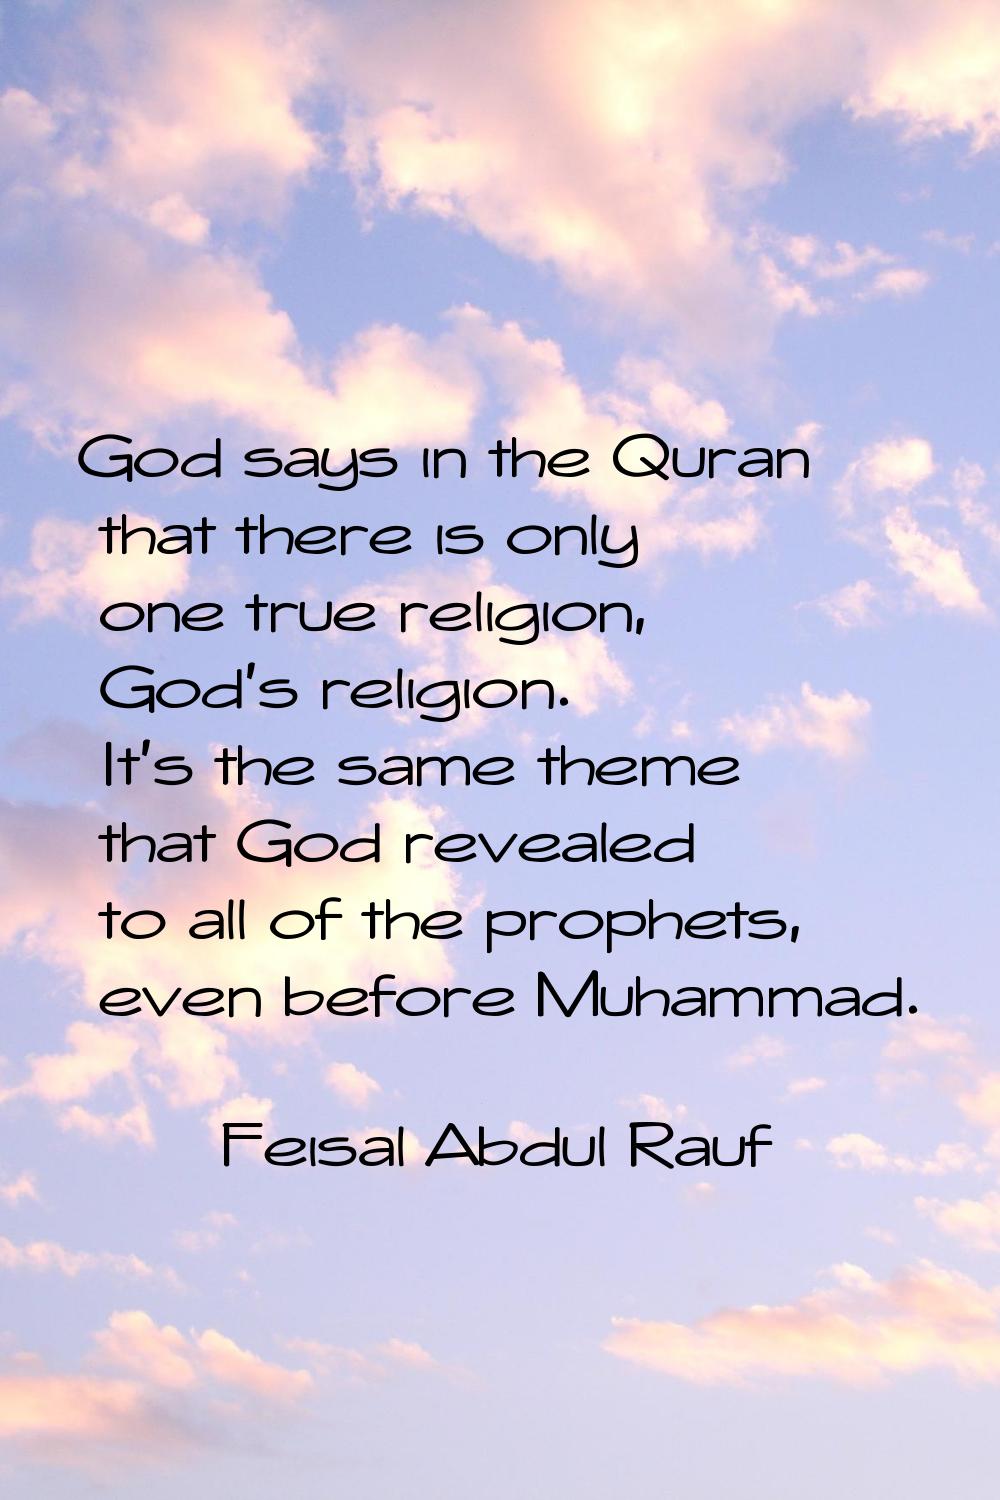 God says in the Quran that there is only one true religion, God's religion. It's the same theme tha